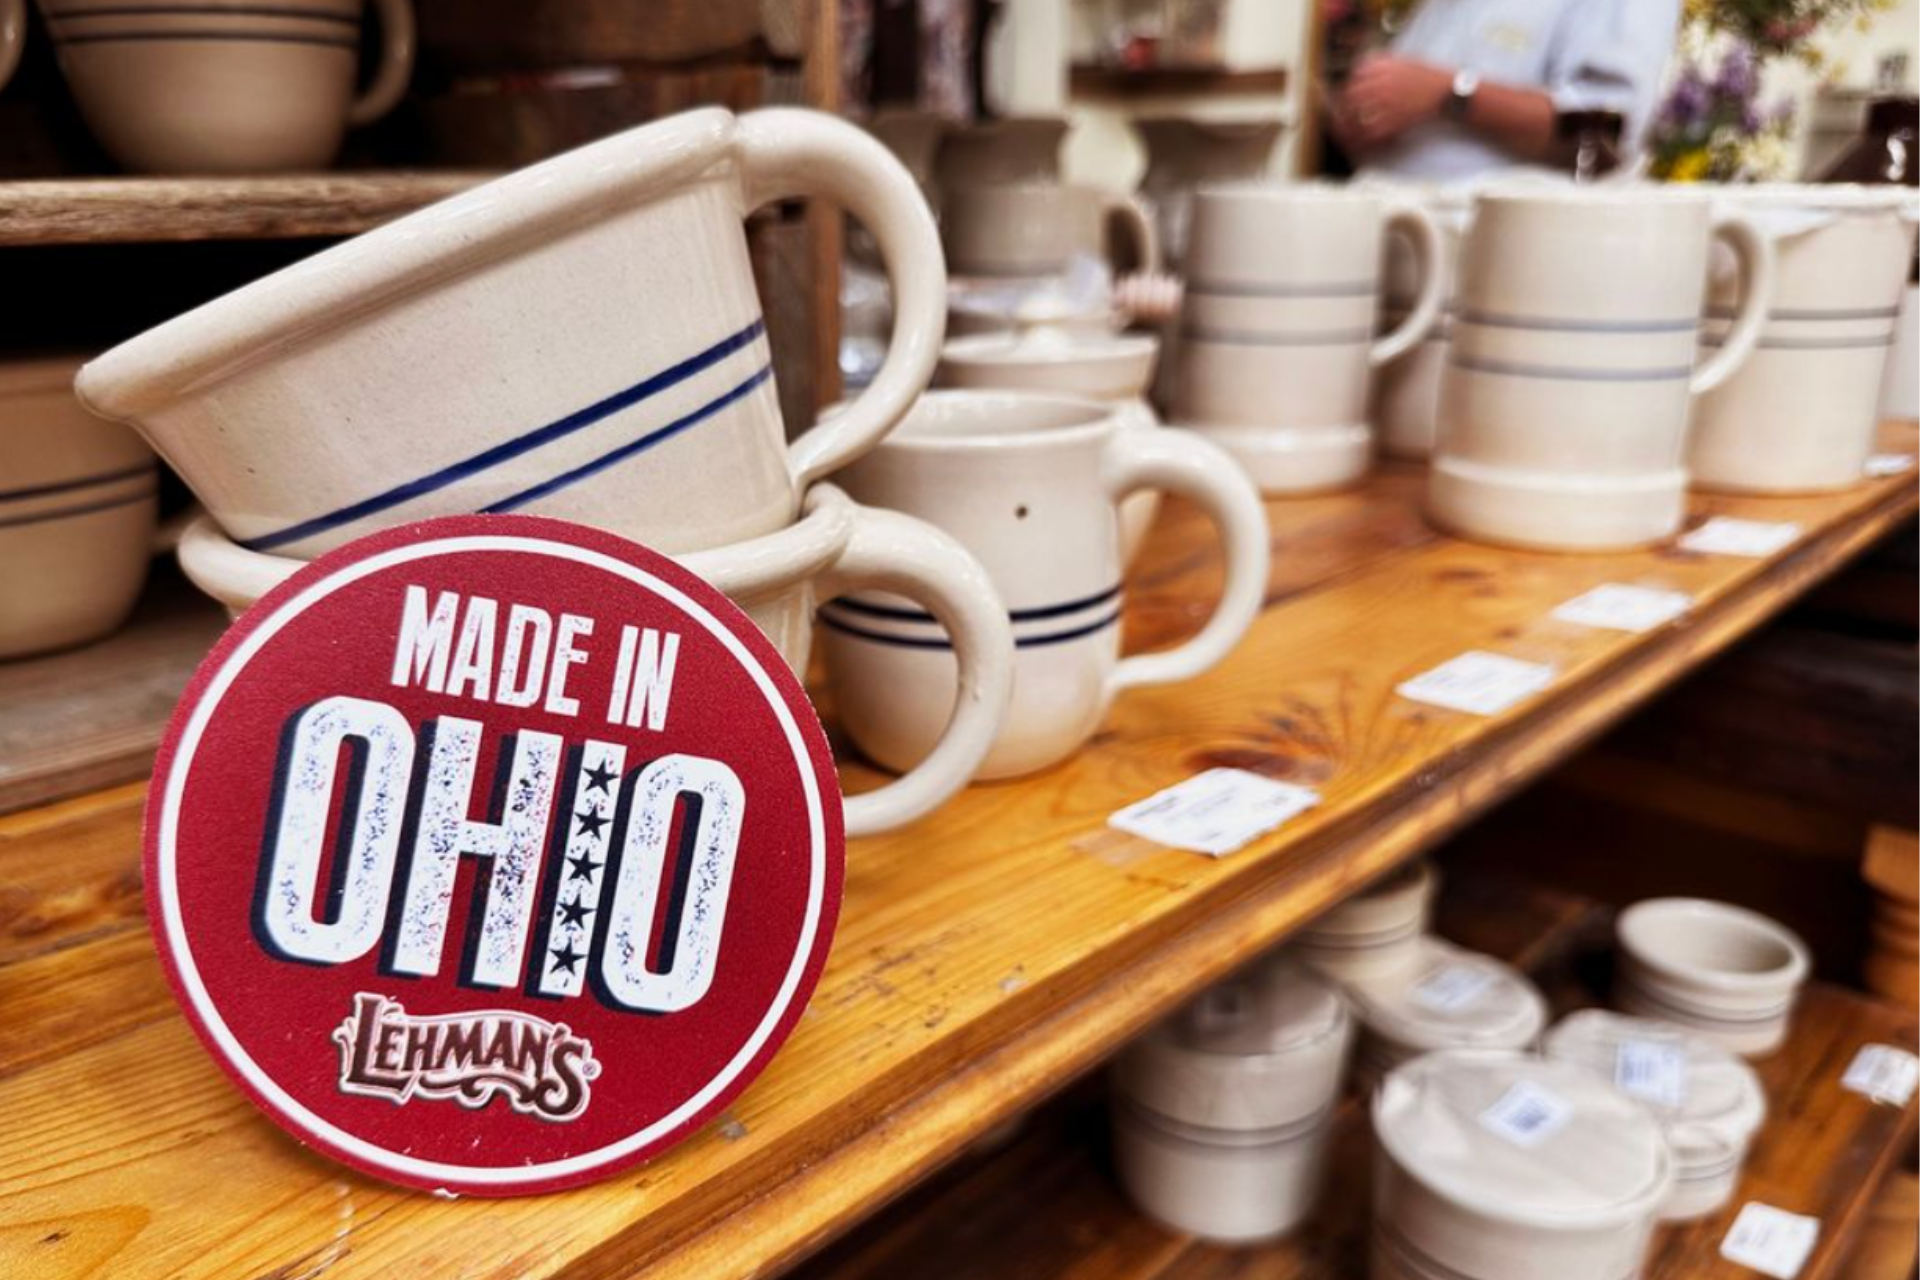 a shelf of crockery with a sign that says made in Ohio Lehman's